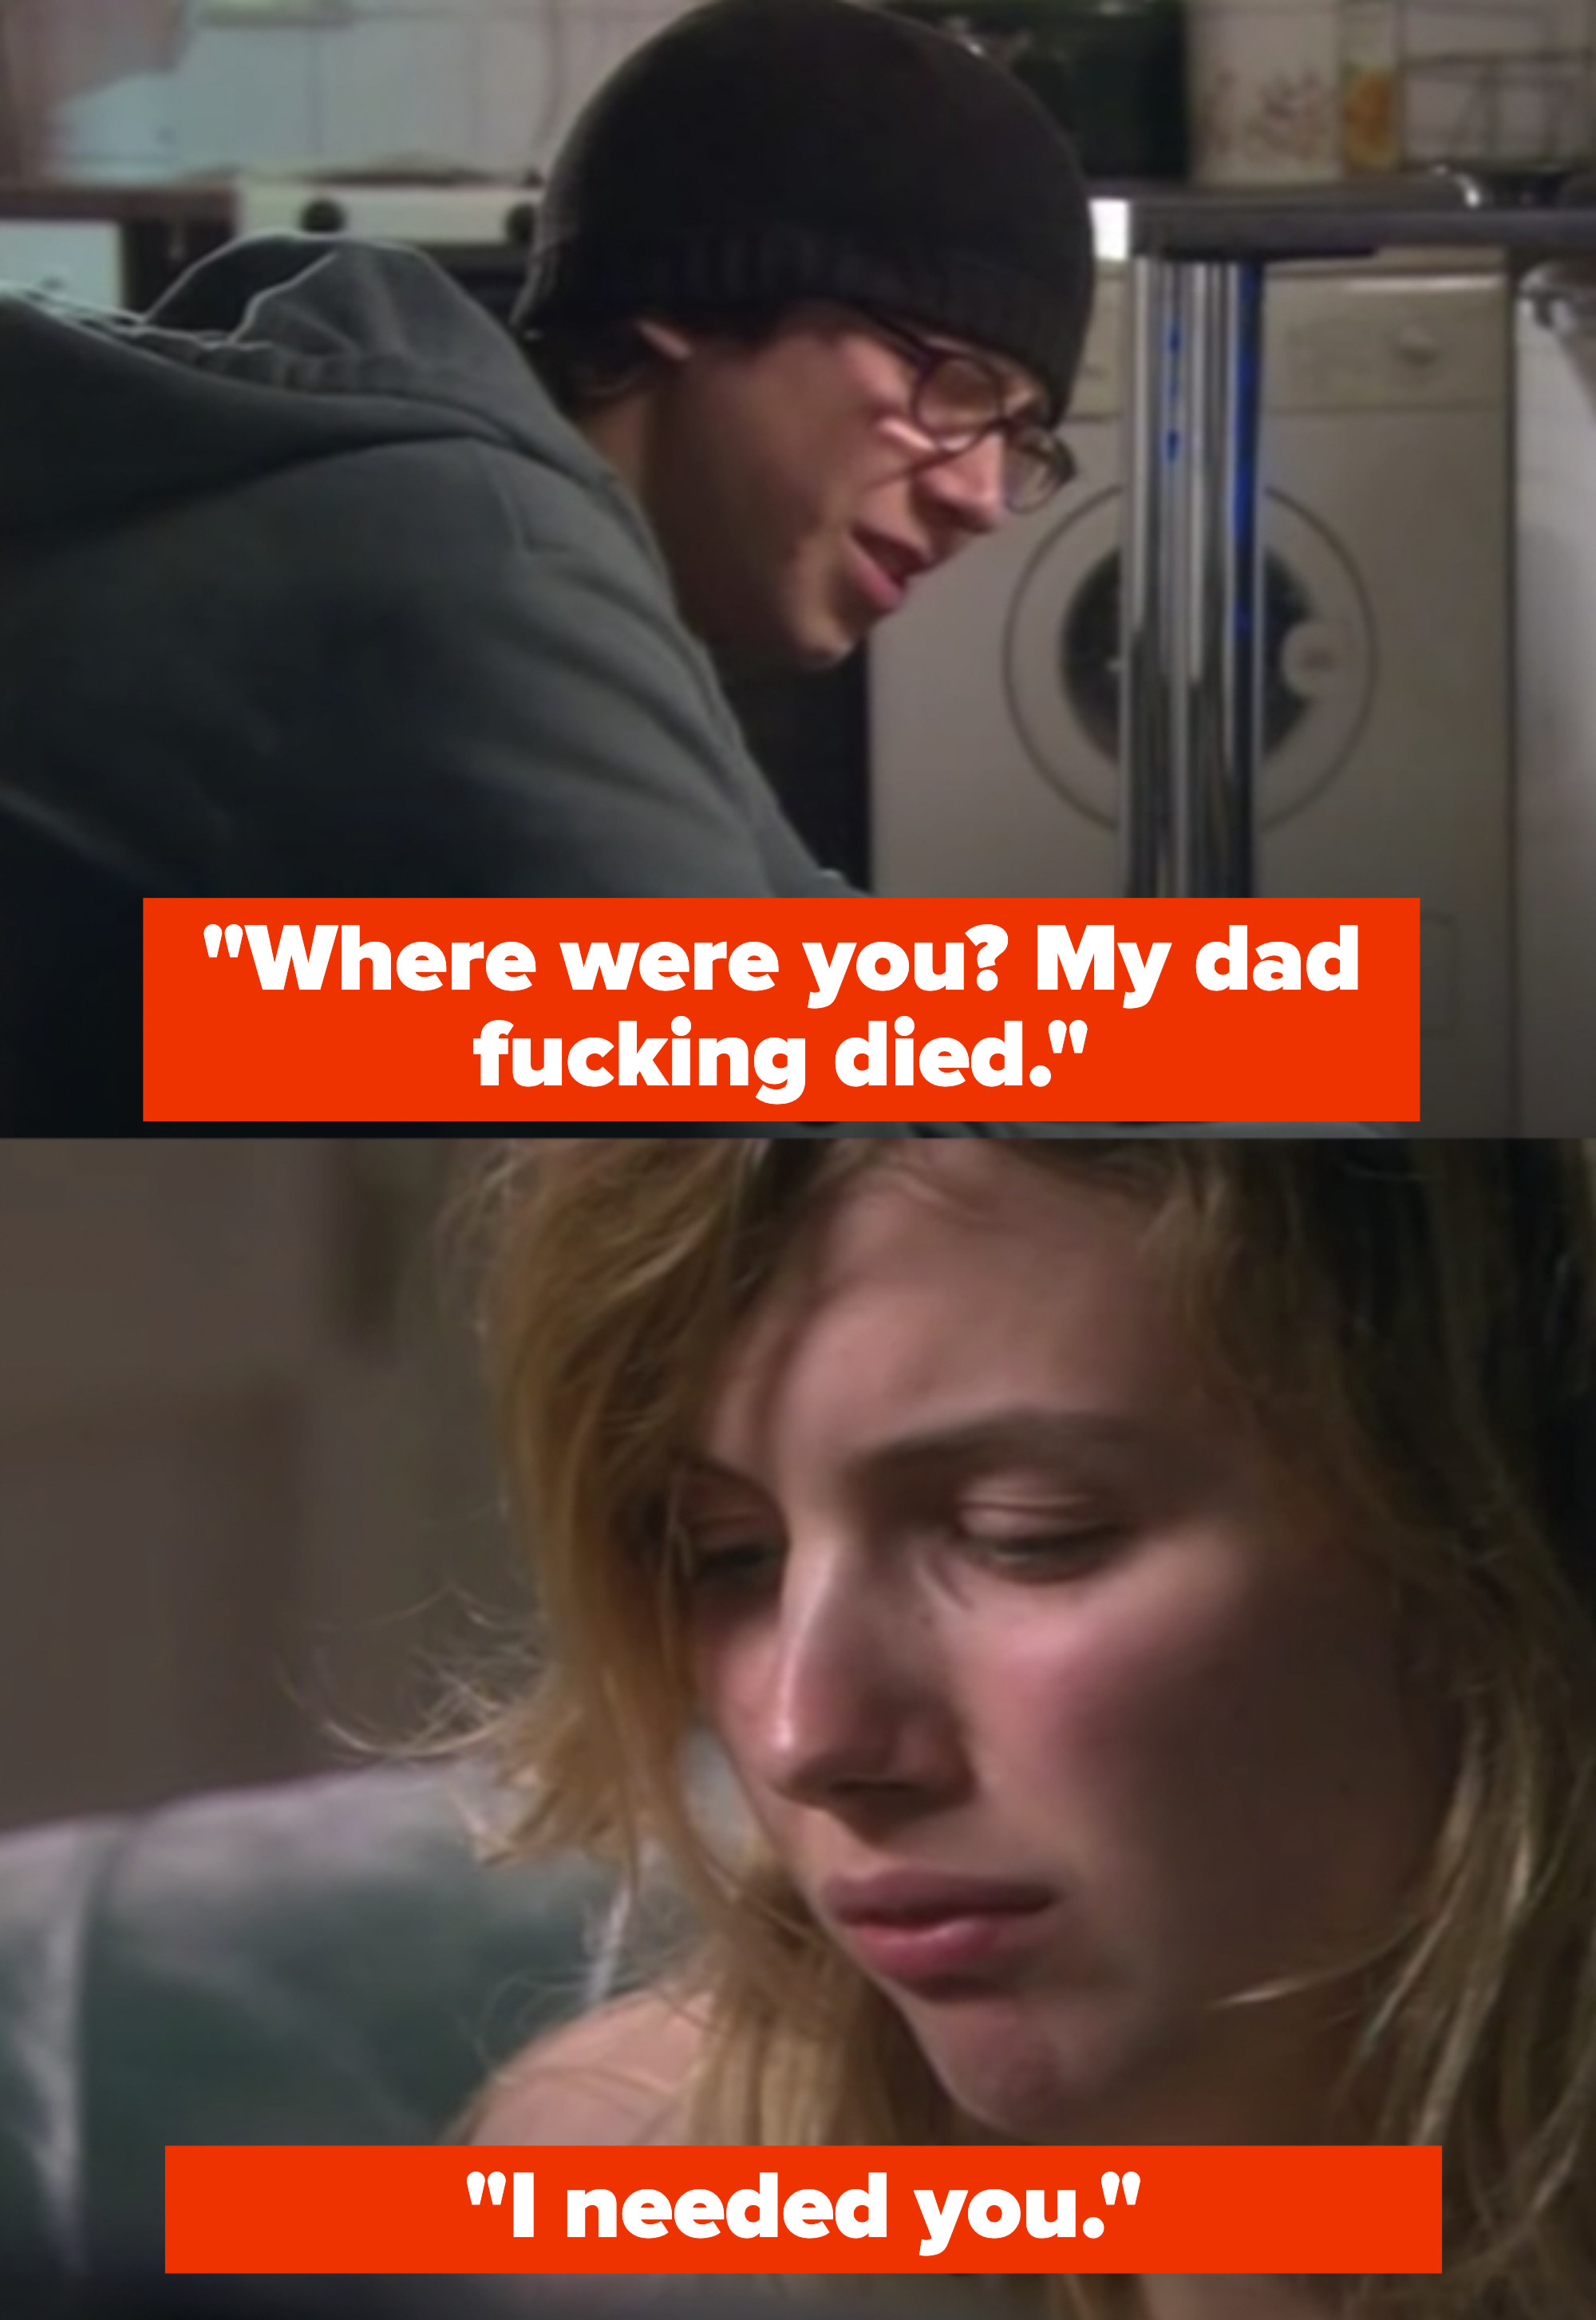 Sid: &quot;Where were you? My dad fucking died. I needed you&quot;